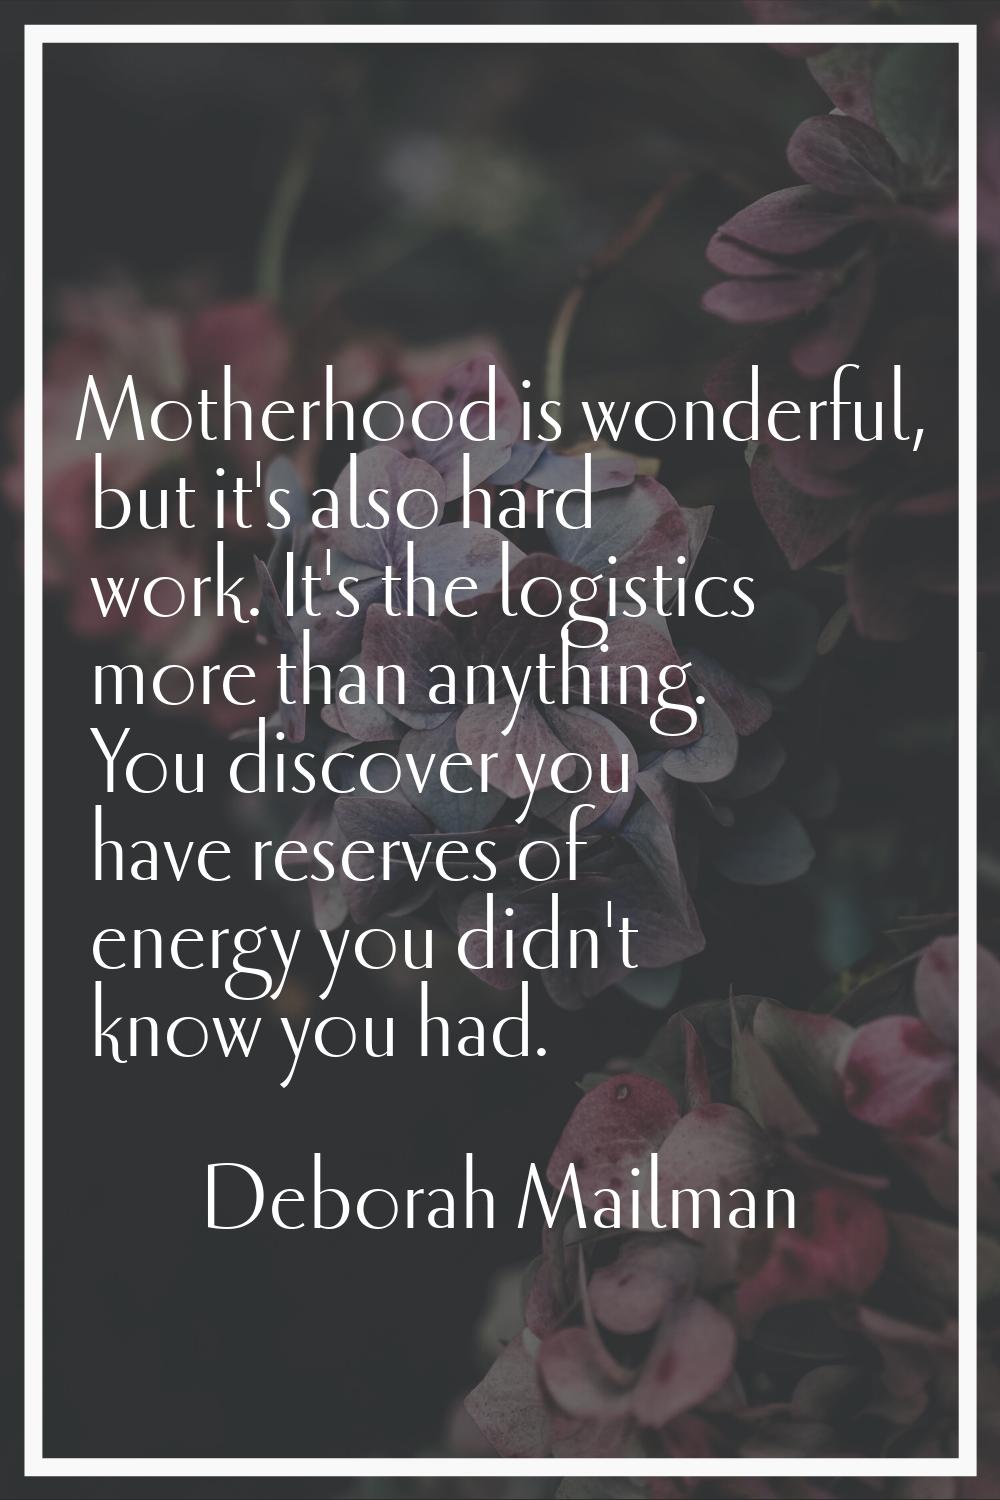 Motherhood is wonderful, but it's also hard work. It's the logistics more than anything. You discov